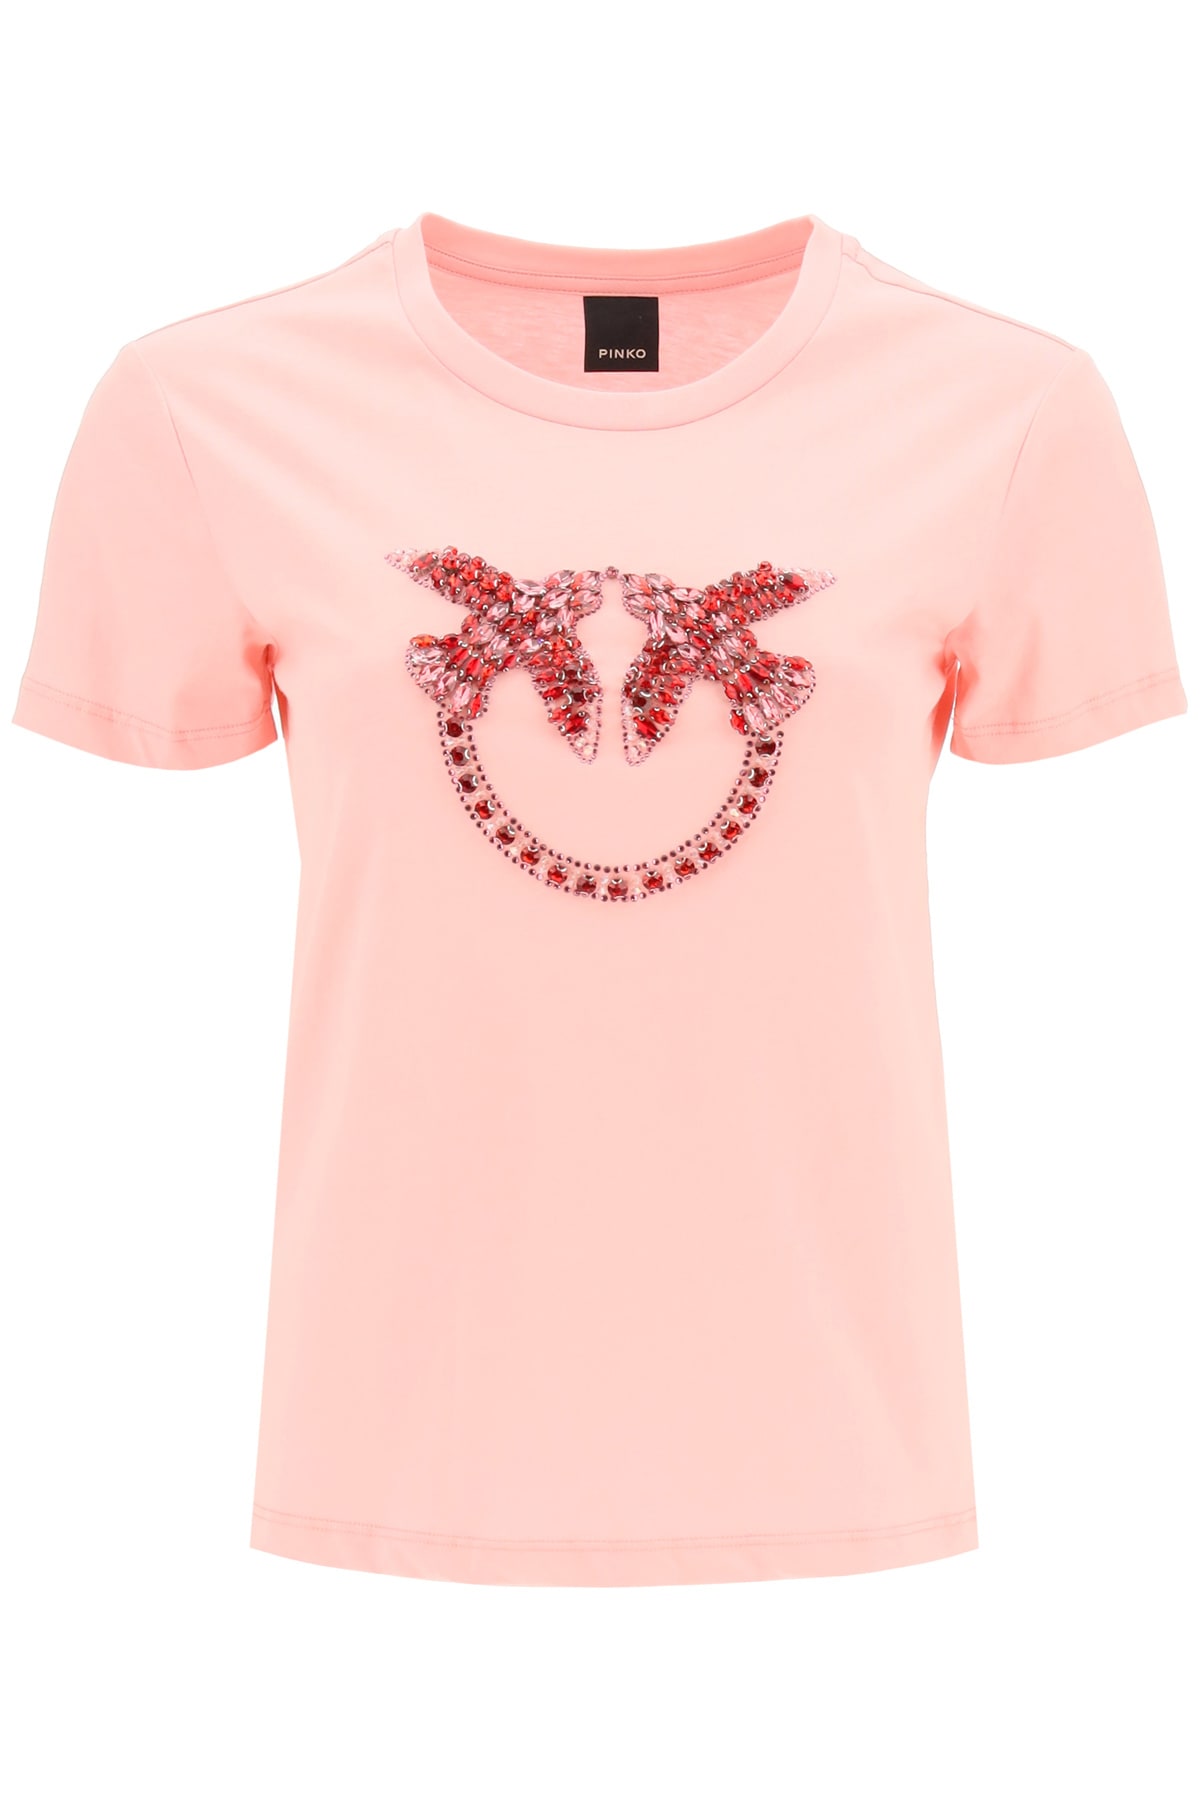 Pinko Quentin T-shirt Love Birds Embroidery